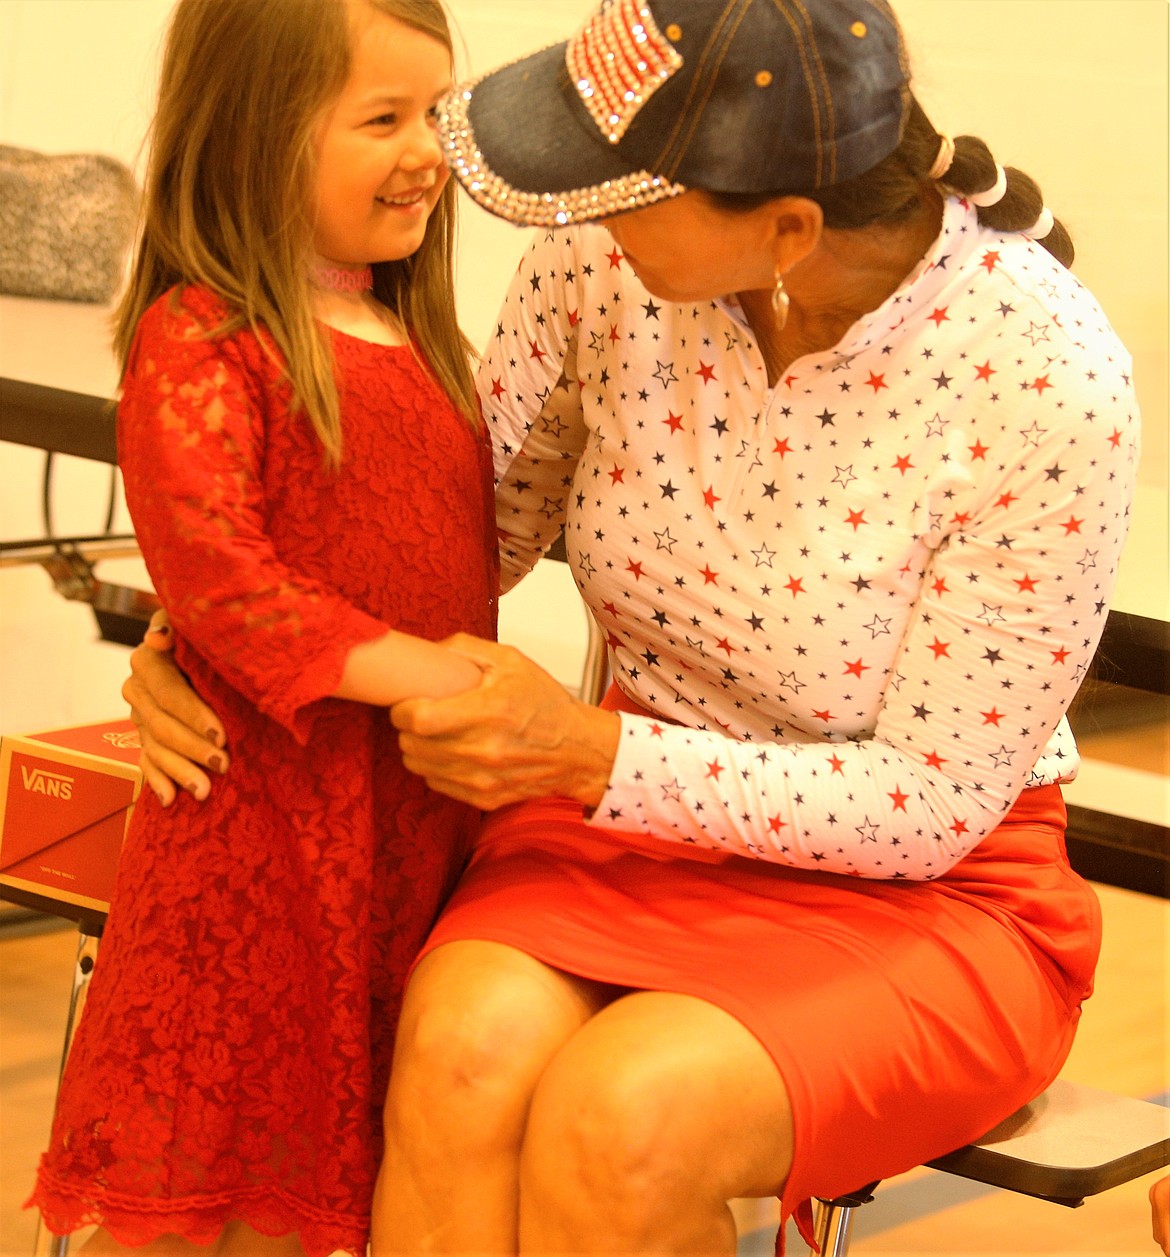 Rita Case chats with Delilah Bailey at the Duane and Lola Hagadone Boys and Girls Club of Kootenai County on Thursday.